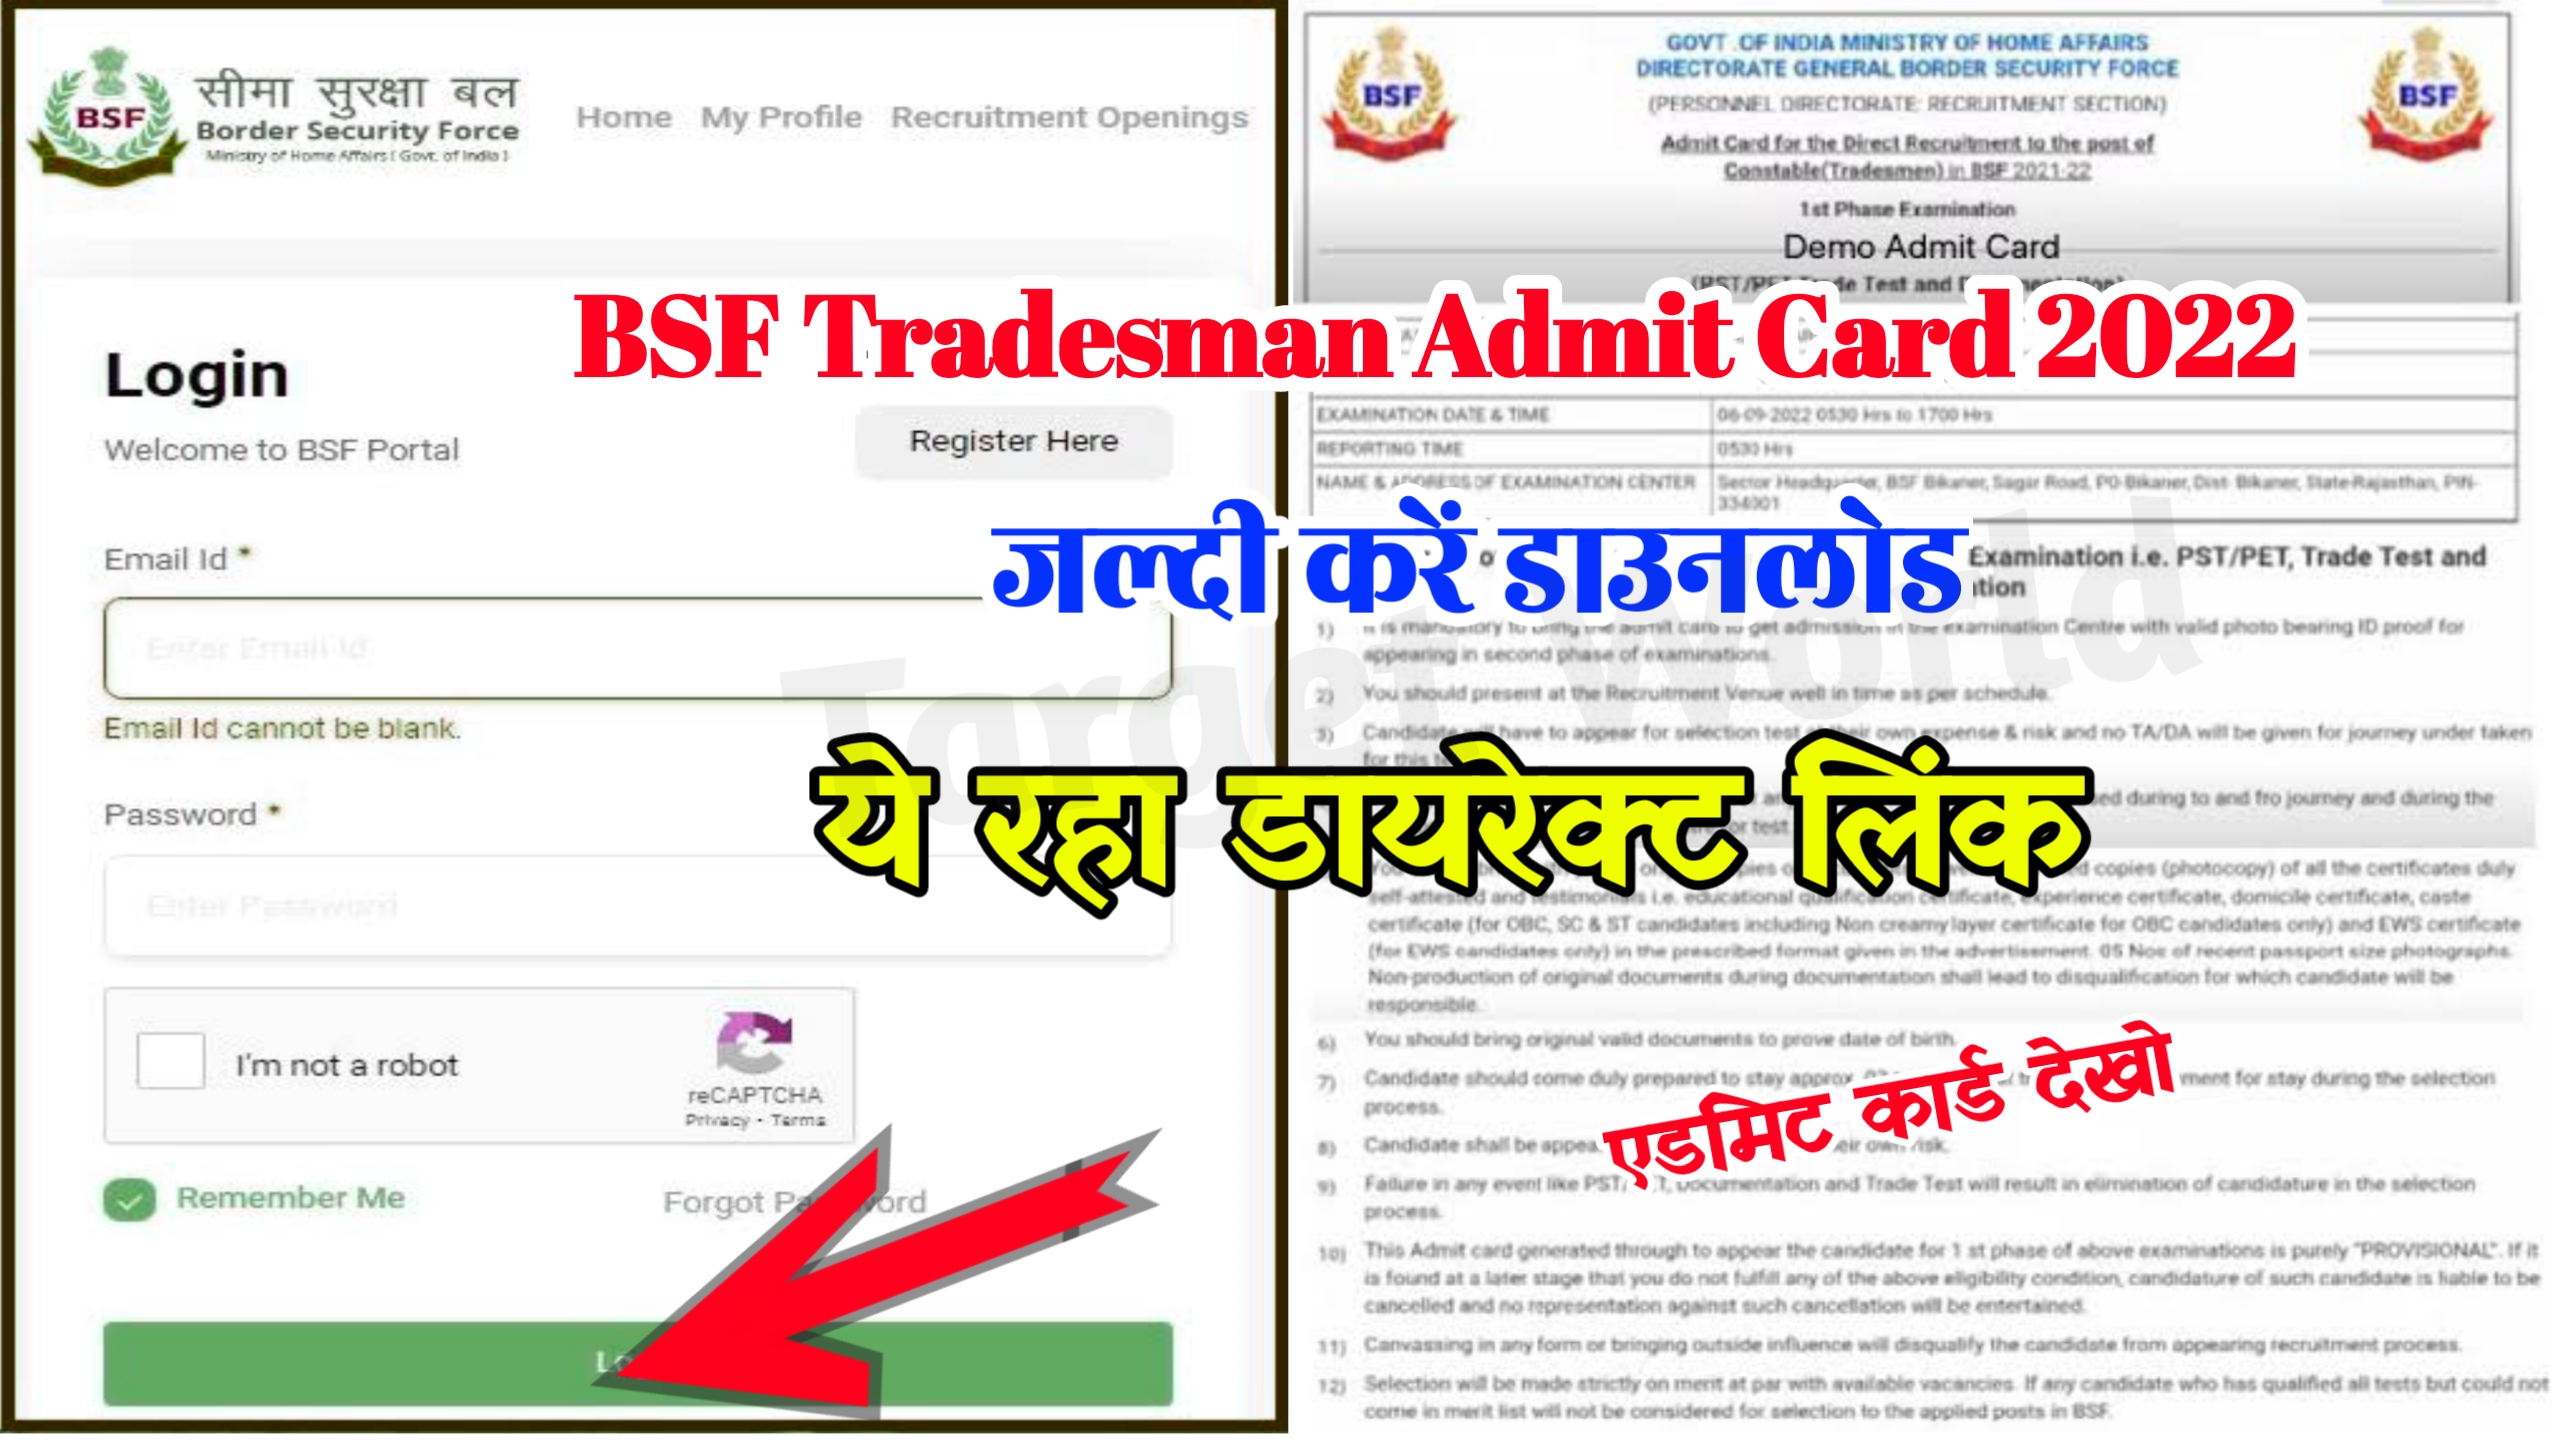 BSF Tradesman Admit Card 2022 Download Link : Hall Ticket @bsf.gov.in